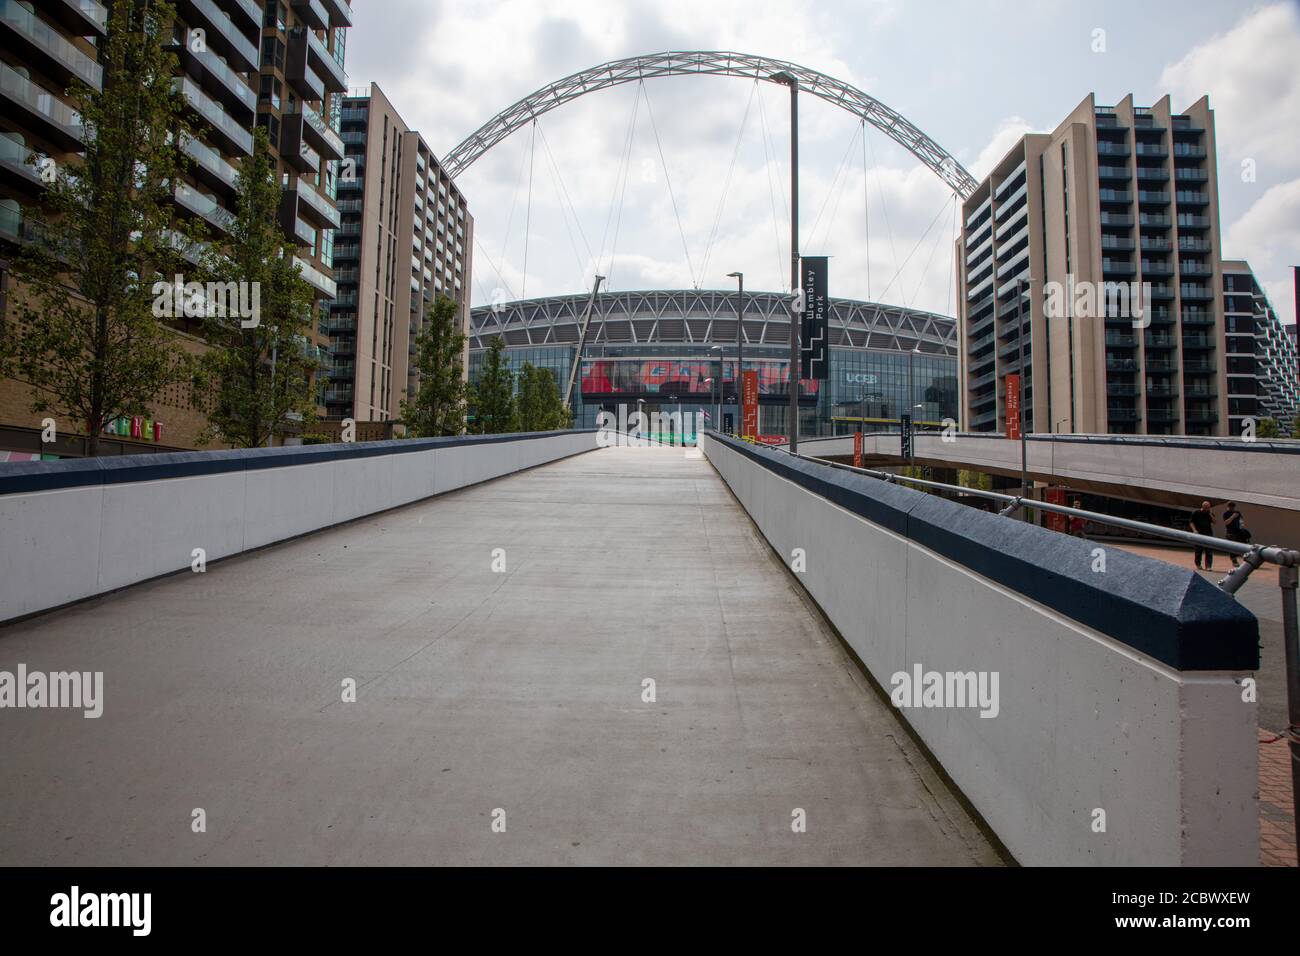 Wembley Stadium, with the pedestrian ramp in the foreground, and flanked on either side by modern housing schemes. Stock Photo